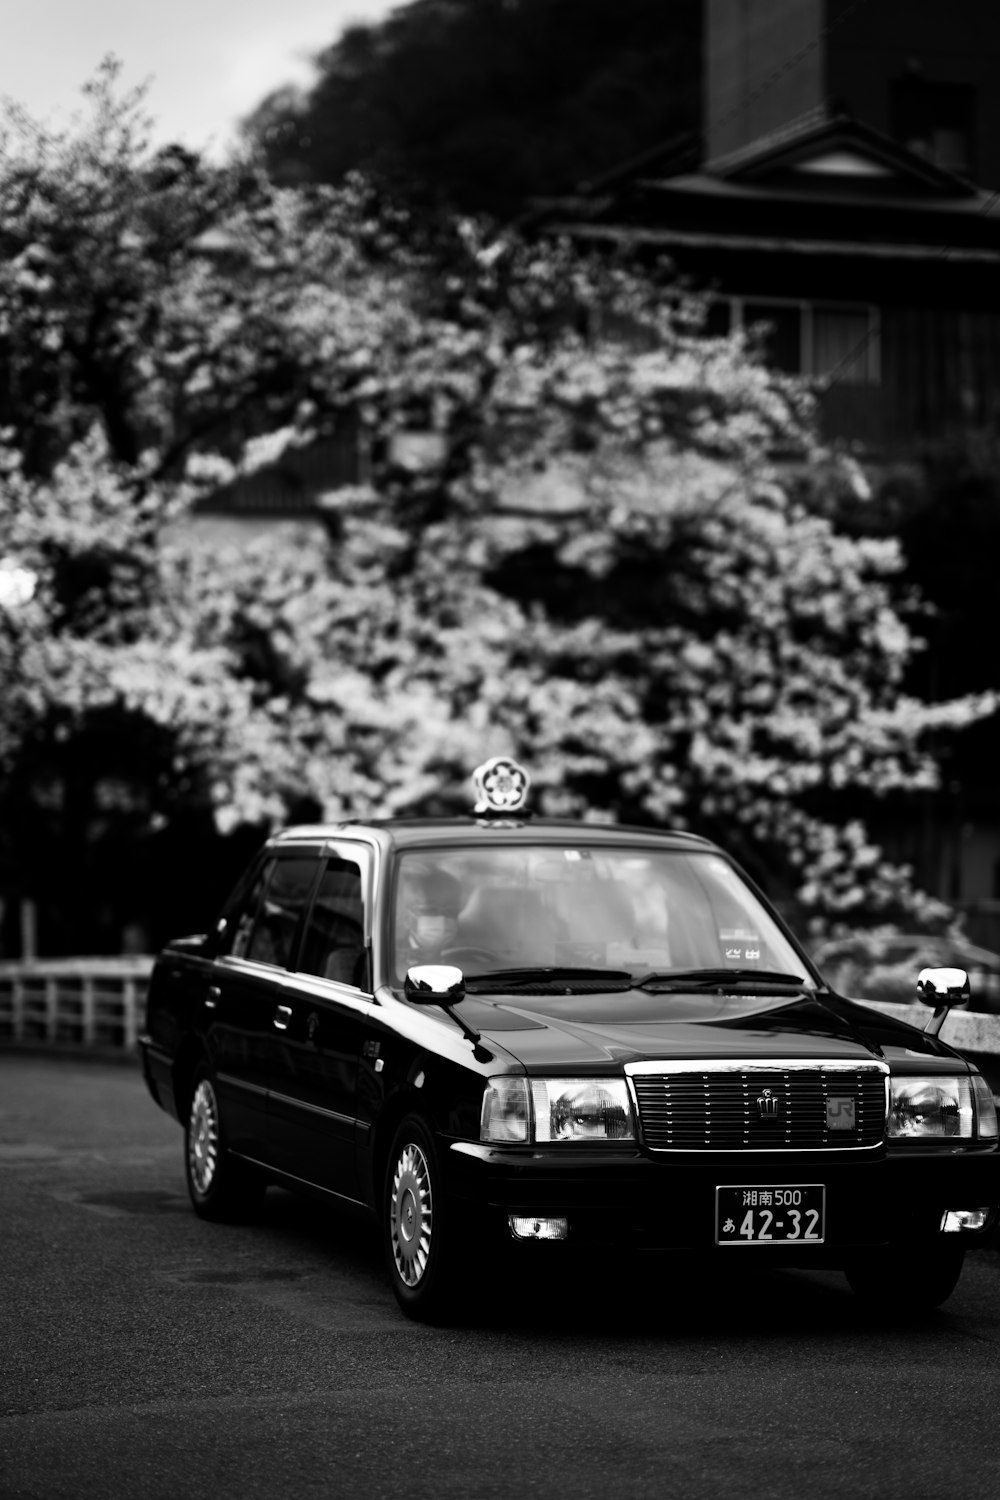 a black and white photo of a taxi cab